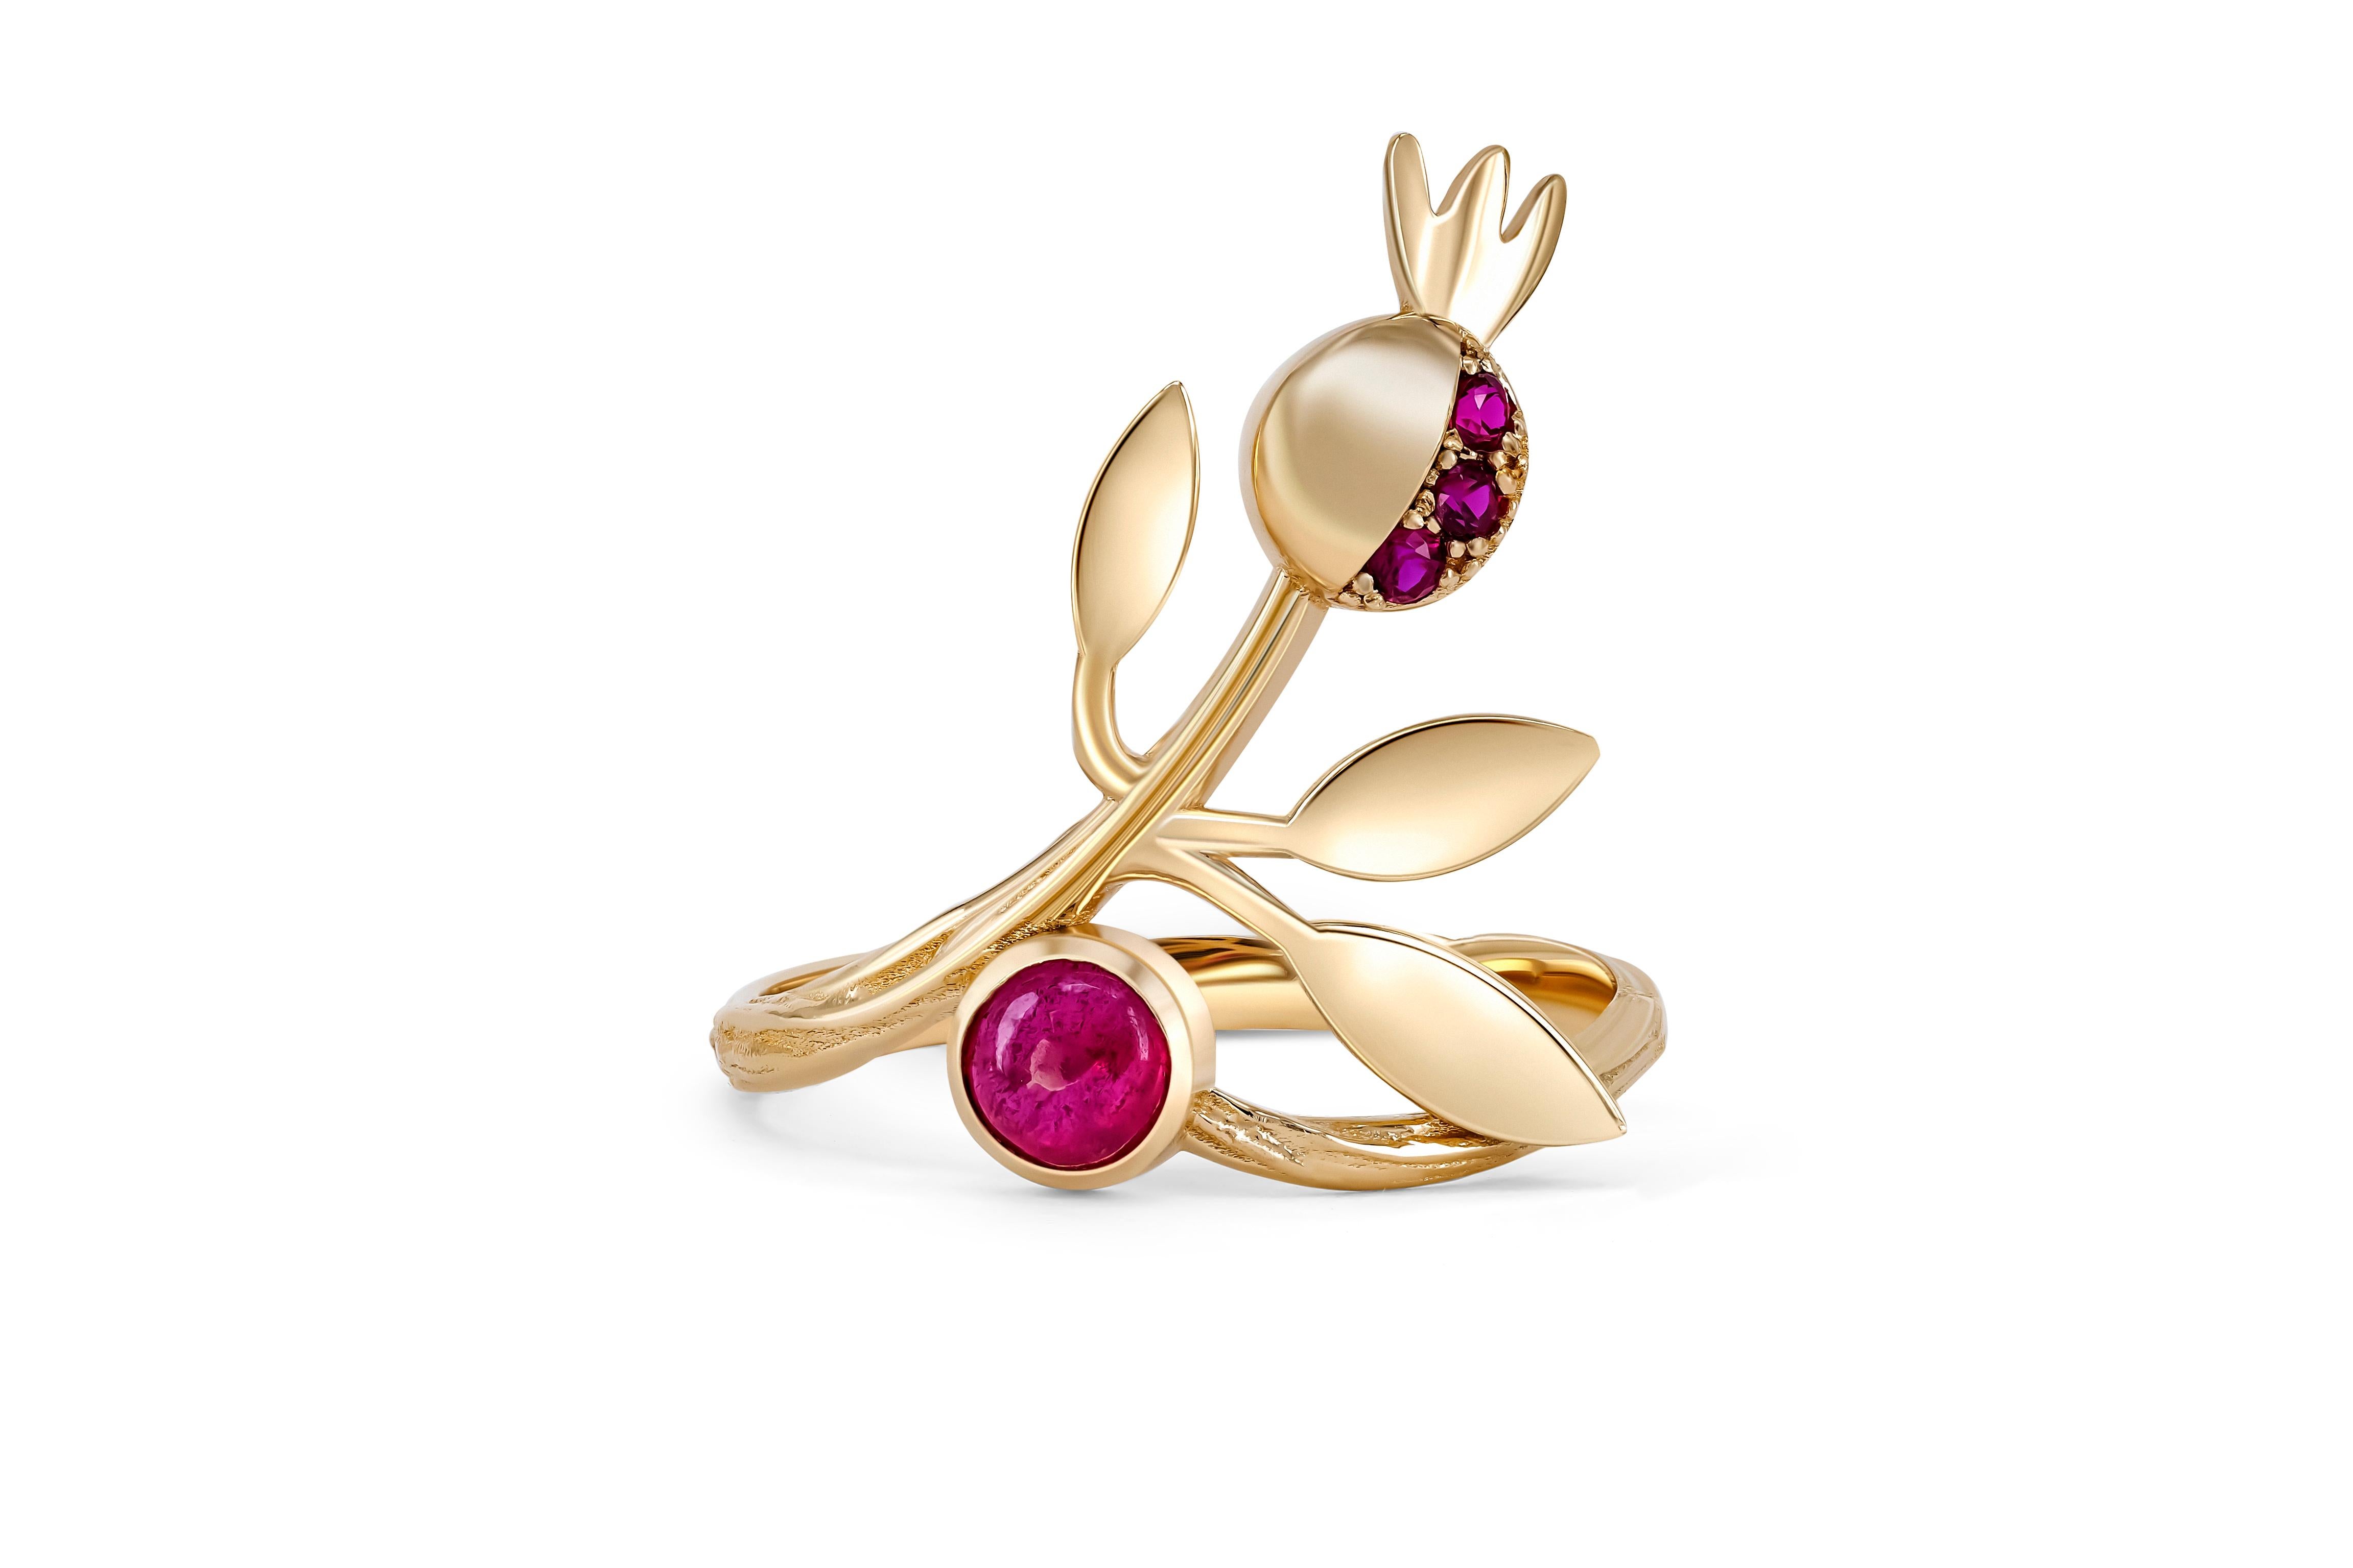 Pomegranate ruby ring. 
Cabochon ruby 14k gold ring. Statement ruby ring. July birthstone ring. Flower gold ring. Gold Fruit ring.

Metal: 14k gold
Weight: 2.15 g. depends from size.

Set with ruby, color - red
Cabochon cut, 0.30 ct. in total, 3.5